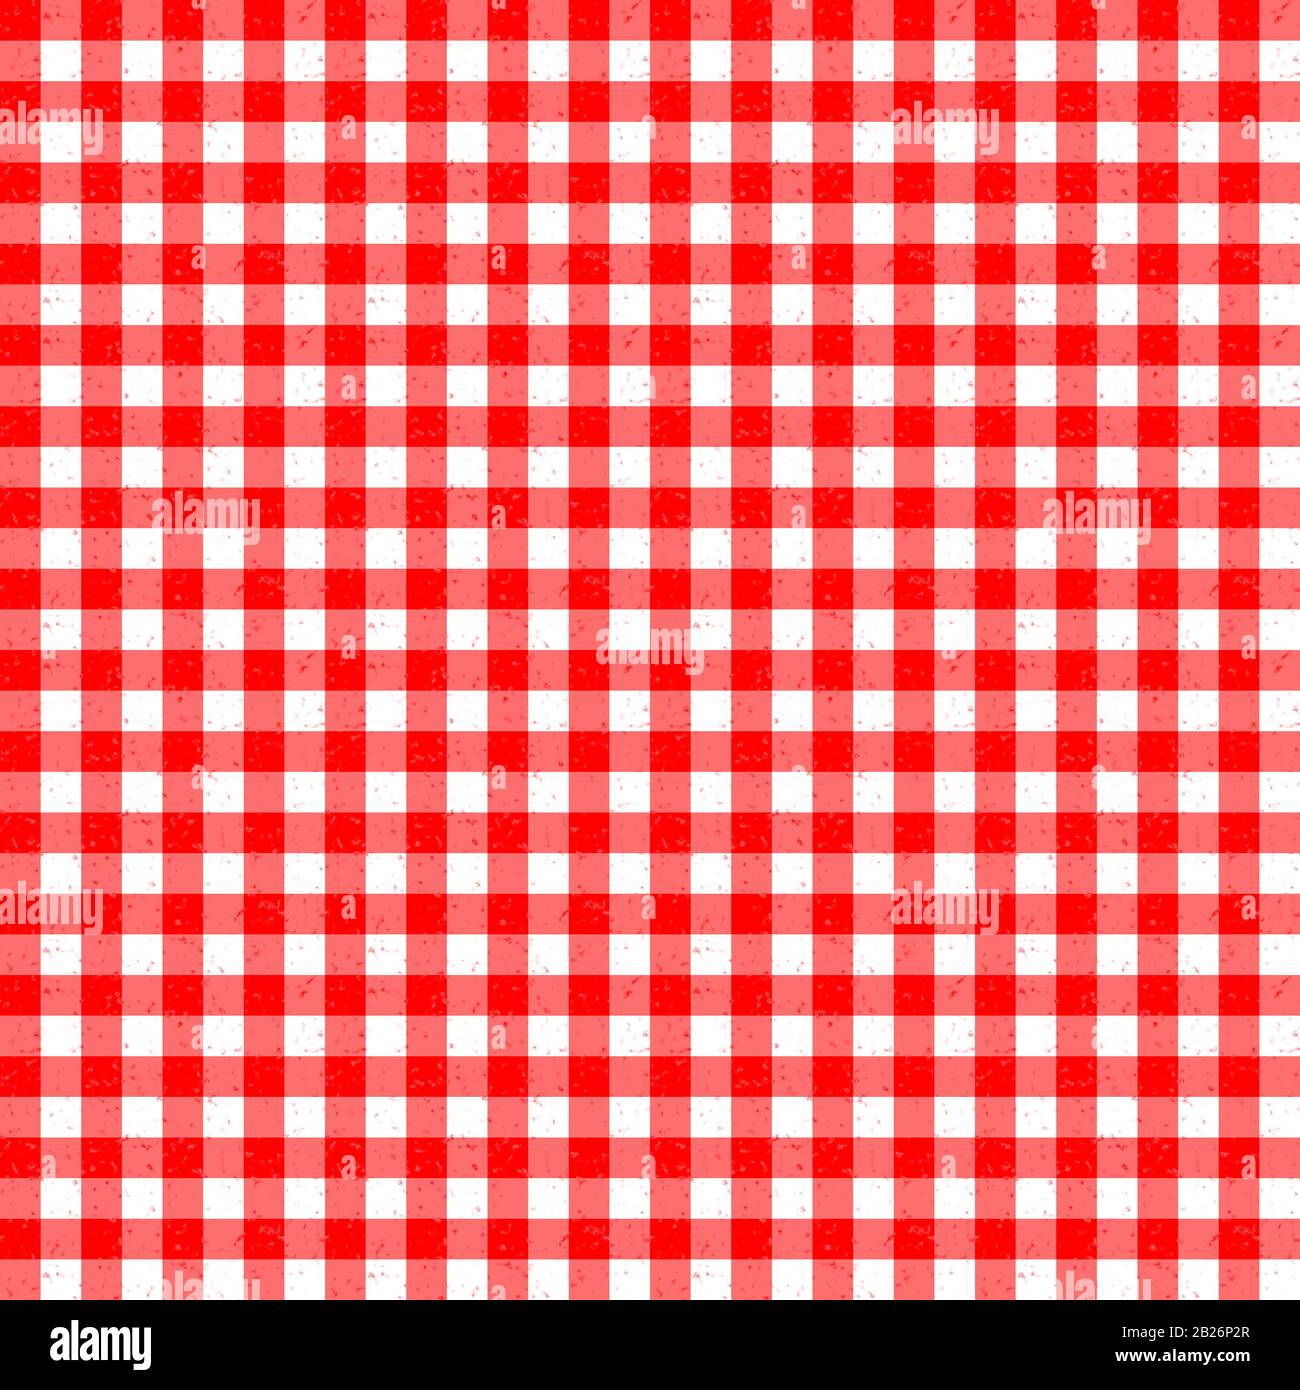 Gingham Classic Style Red and White Seemless Pattern With Speckled Effect Stock Photo